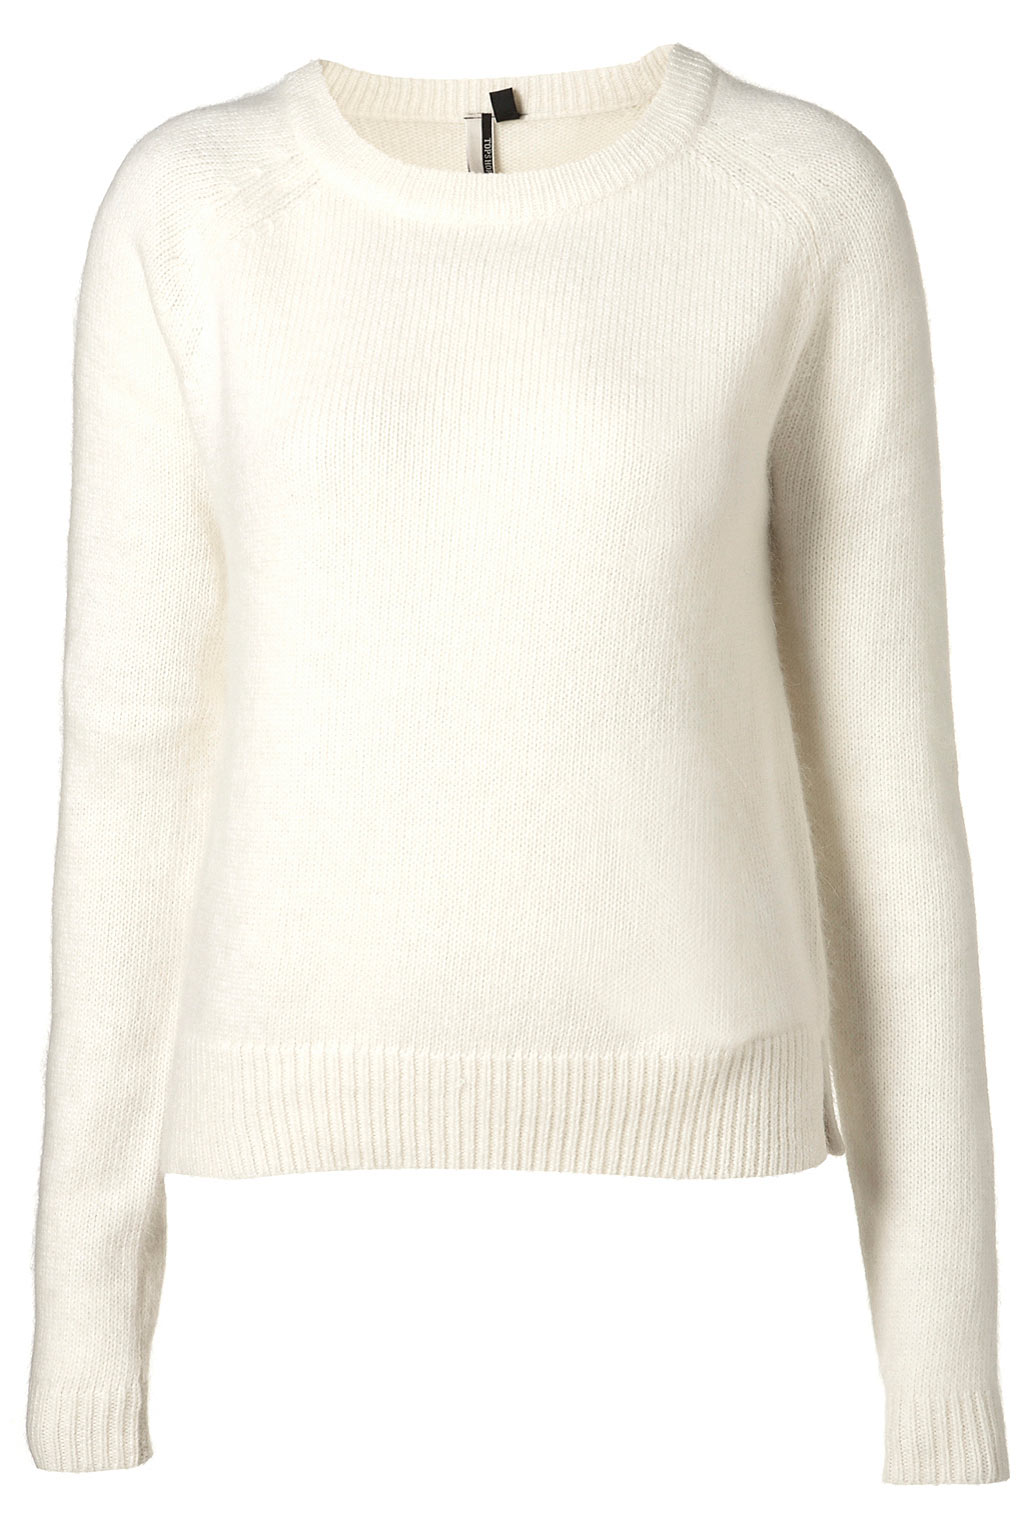 Lyst - TOPSHOP Knitted Fluffy Jumper in White